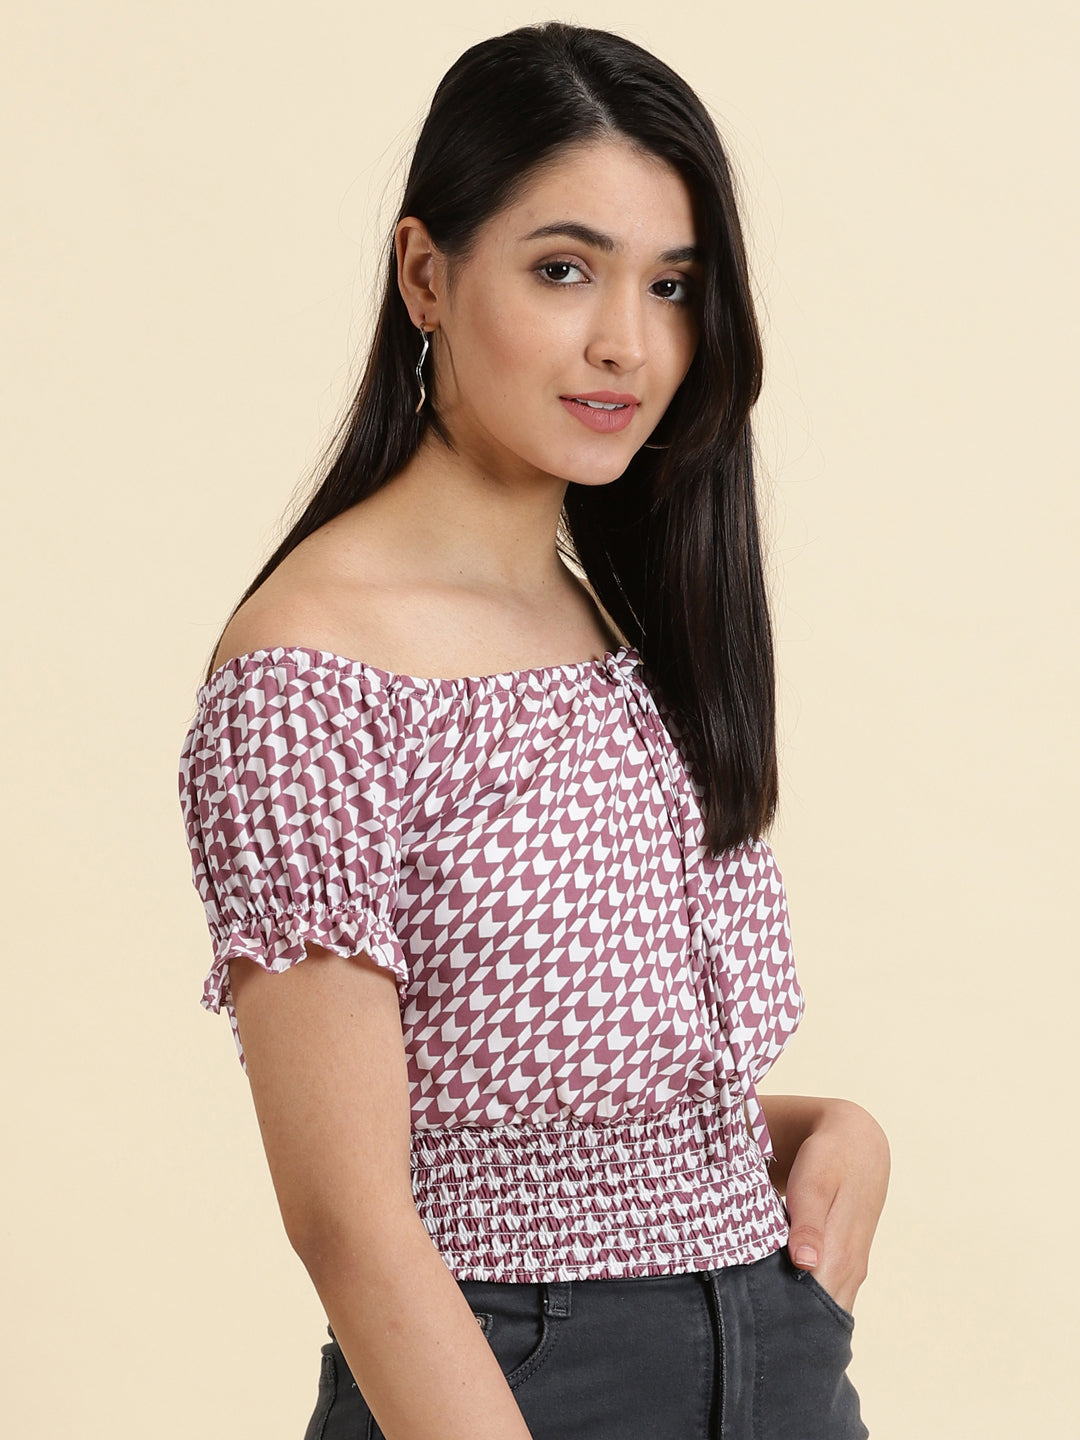 Women's White Printed Cinched Waist Top